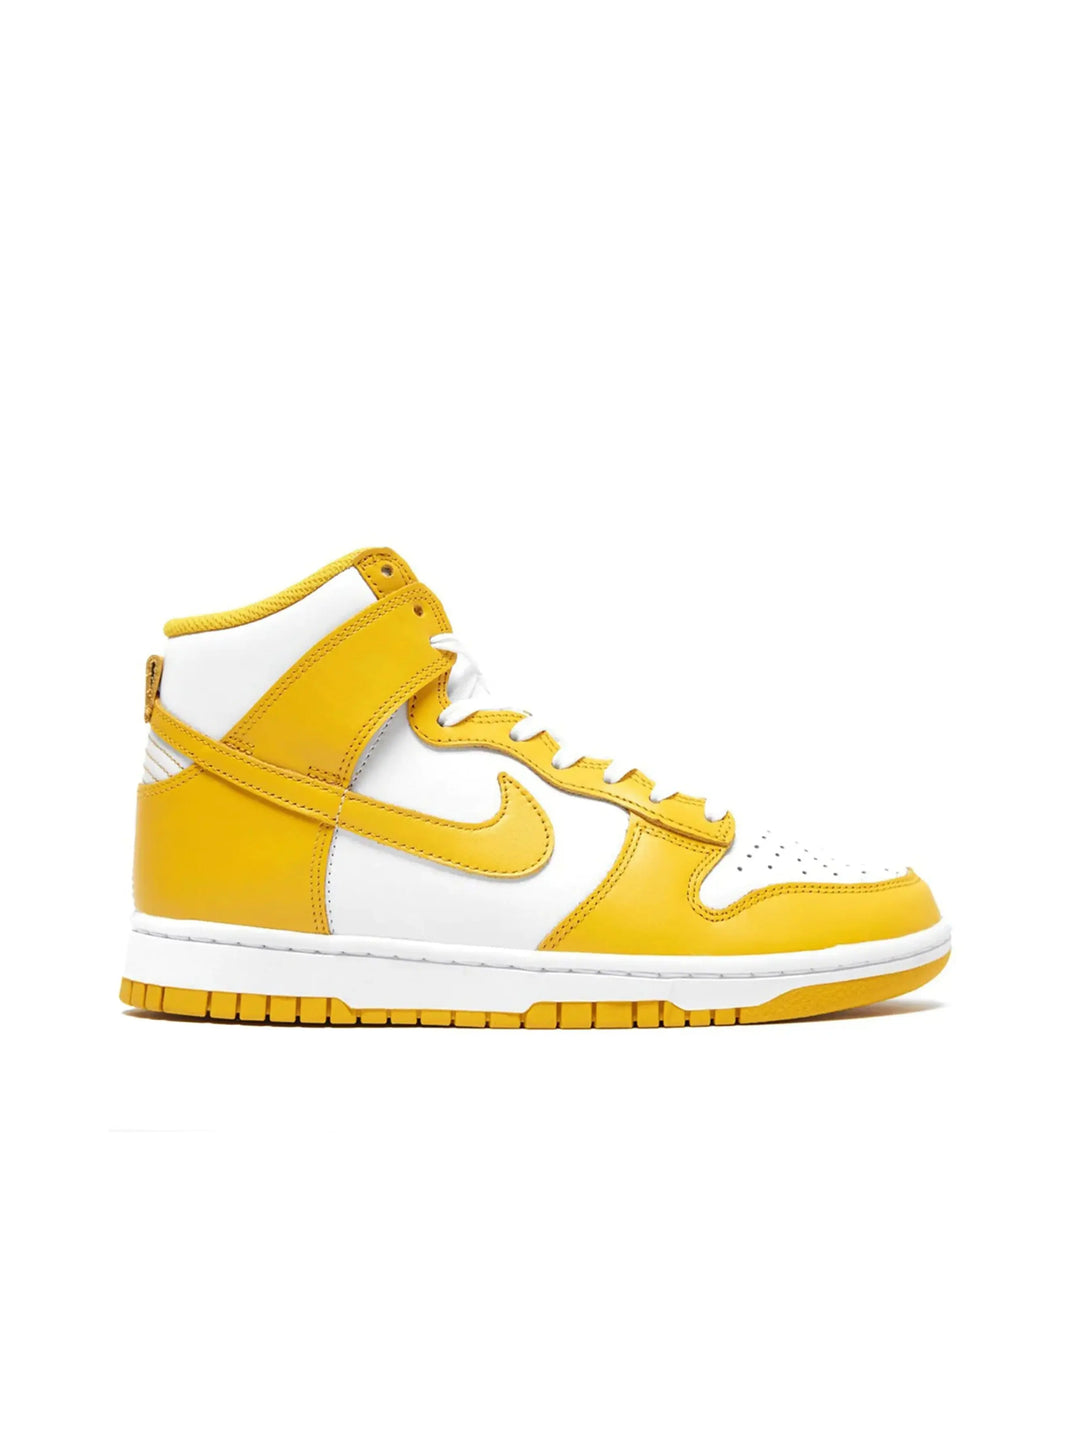 Nike Dunk High Dark Sulfur (W) in Auckland, New Zealand - Shop name